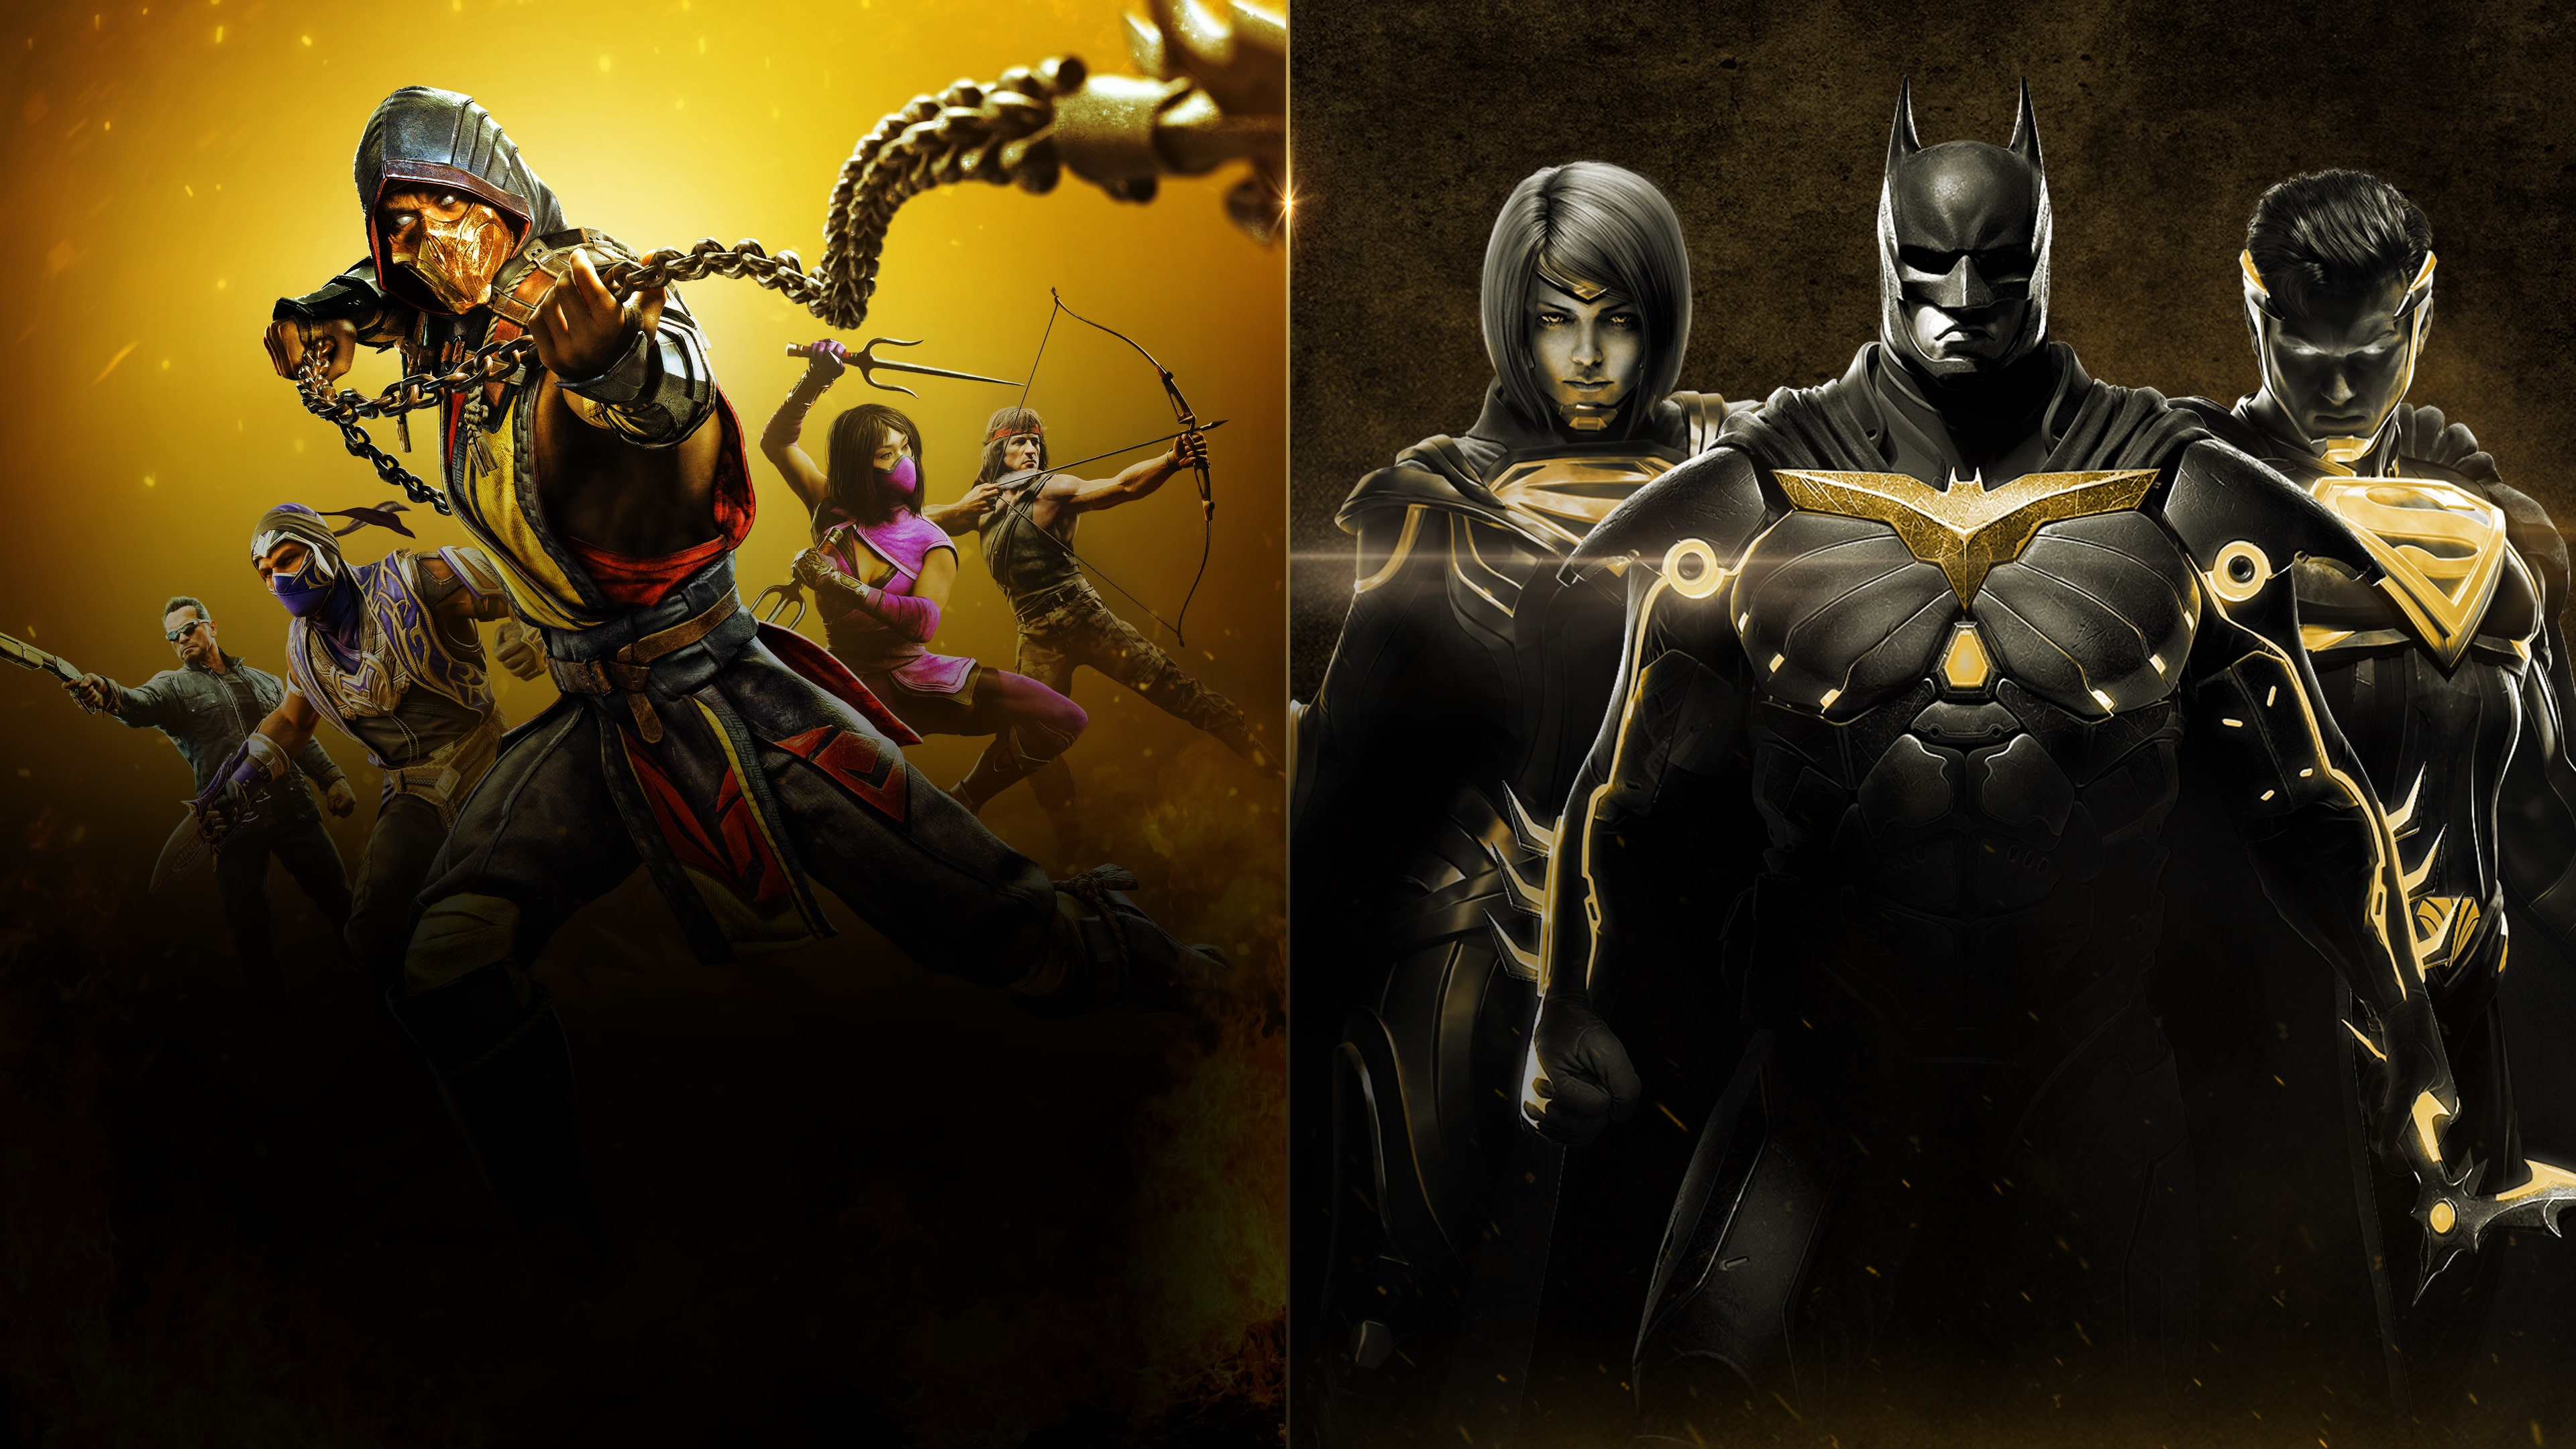 Double Pack MK11 Ultimate + Injustice 2 Legendary Edition